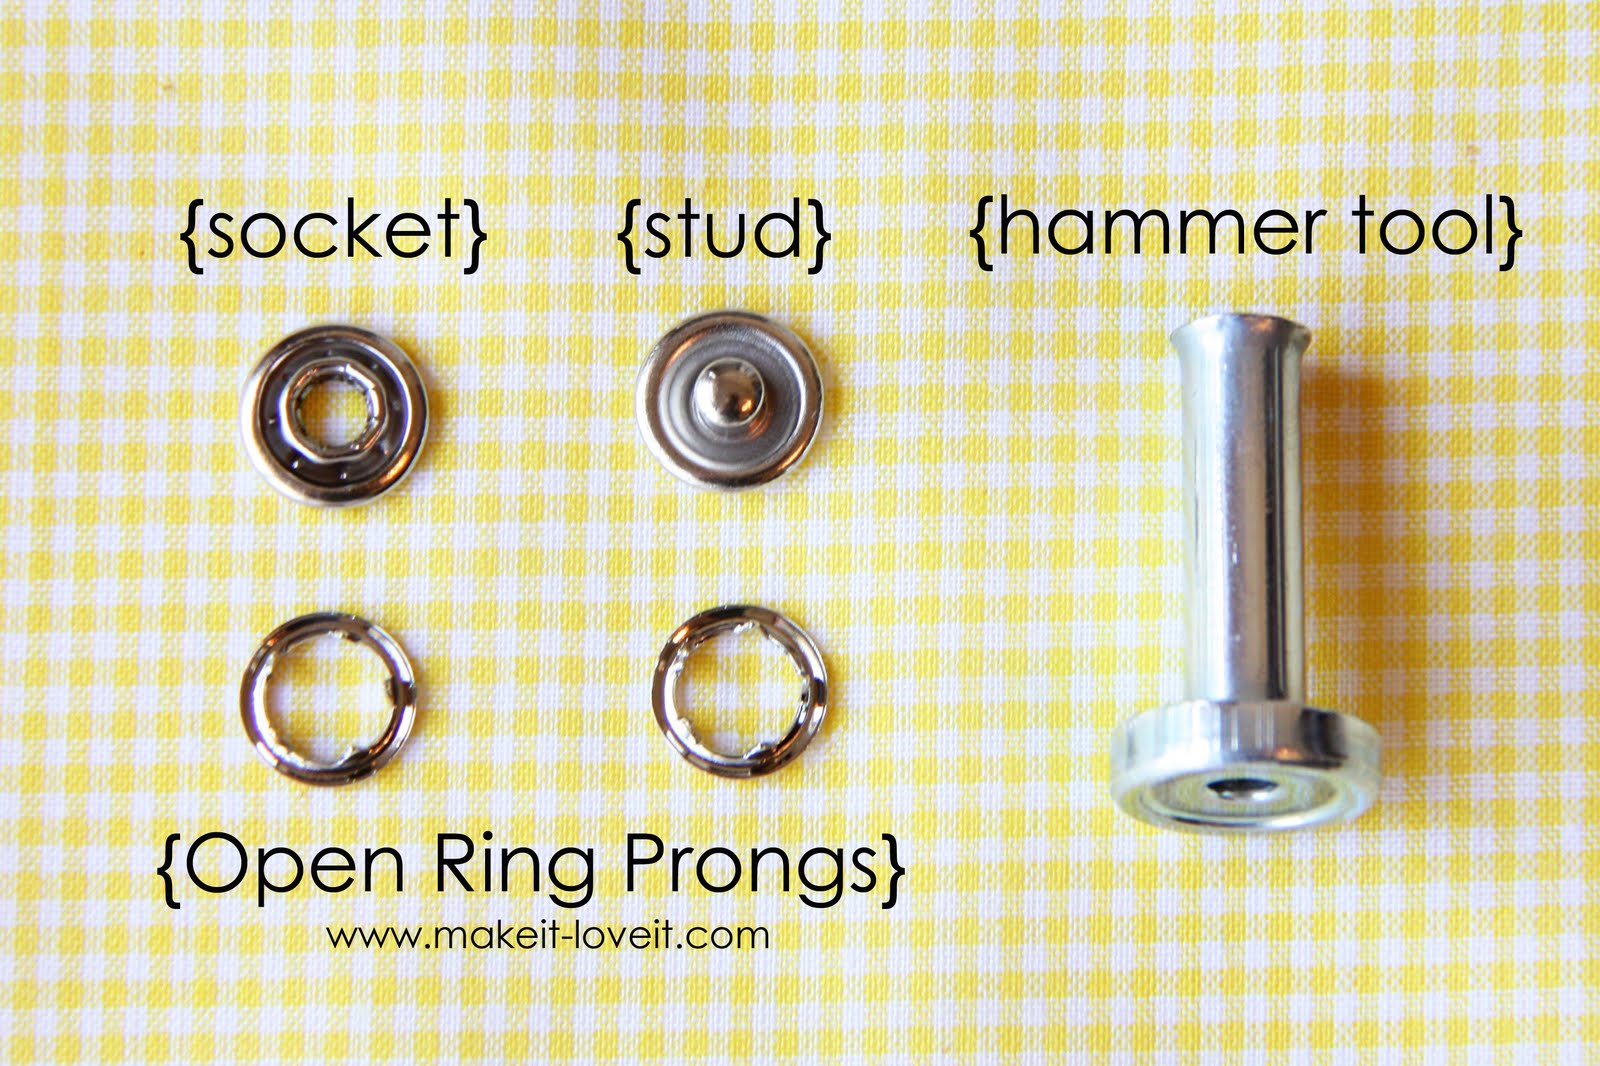 A Quick Guide To Snap Fasteners For Clothing Or Bags